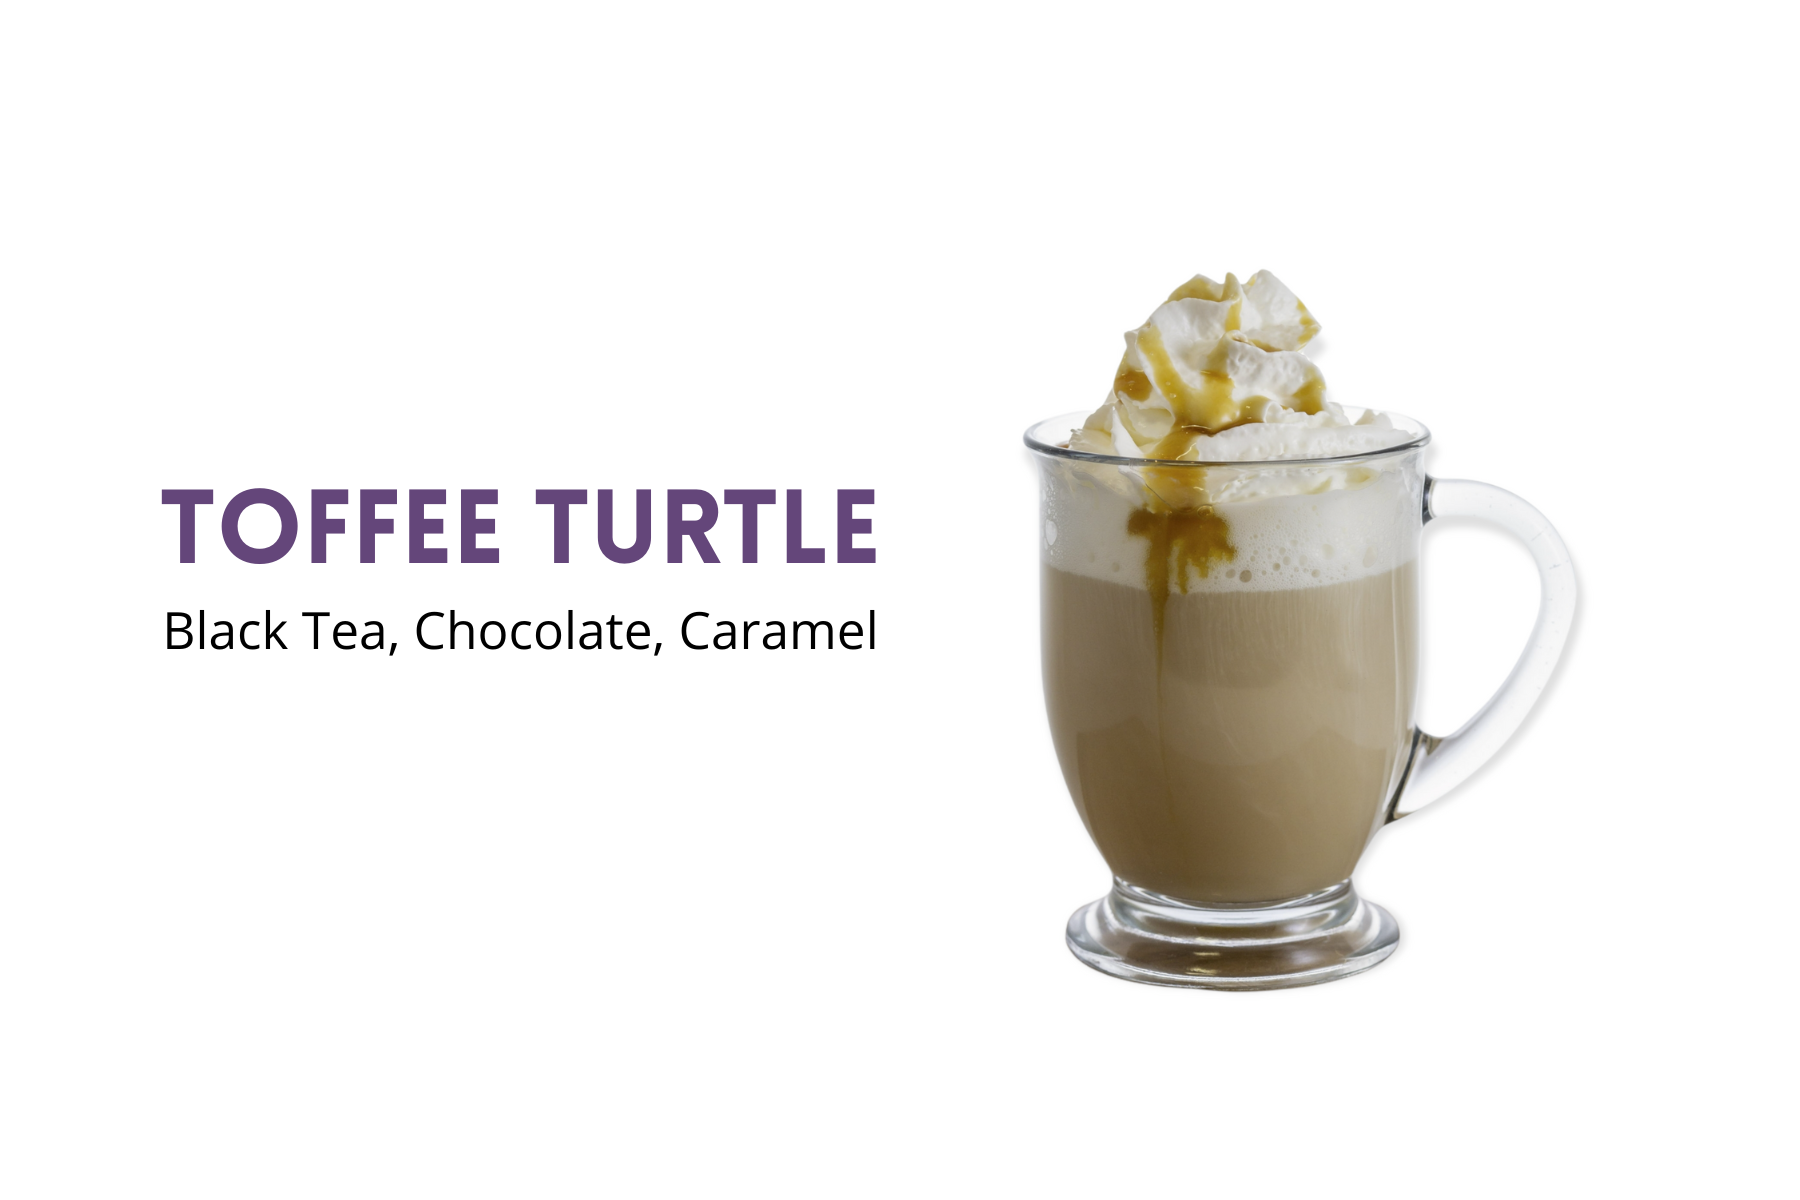 How to Make a Toffee Turtle